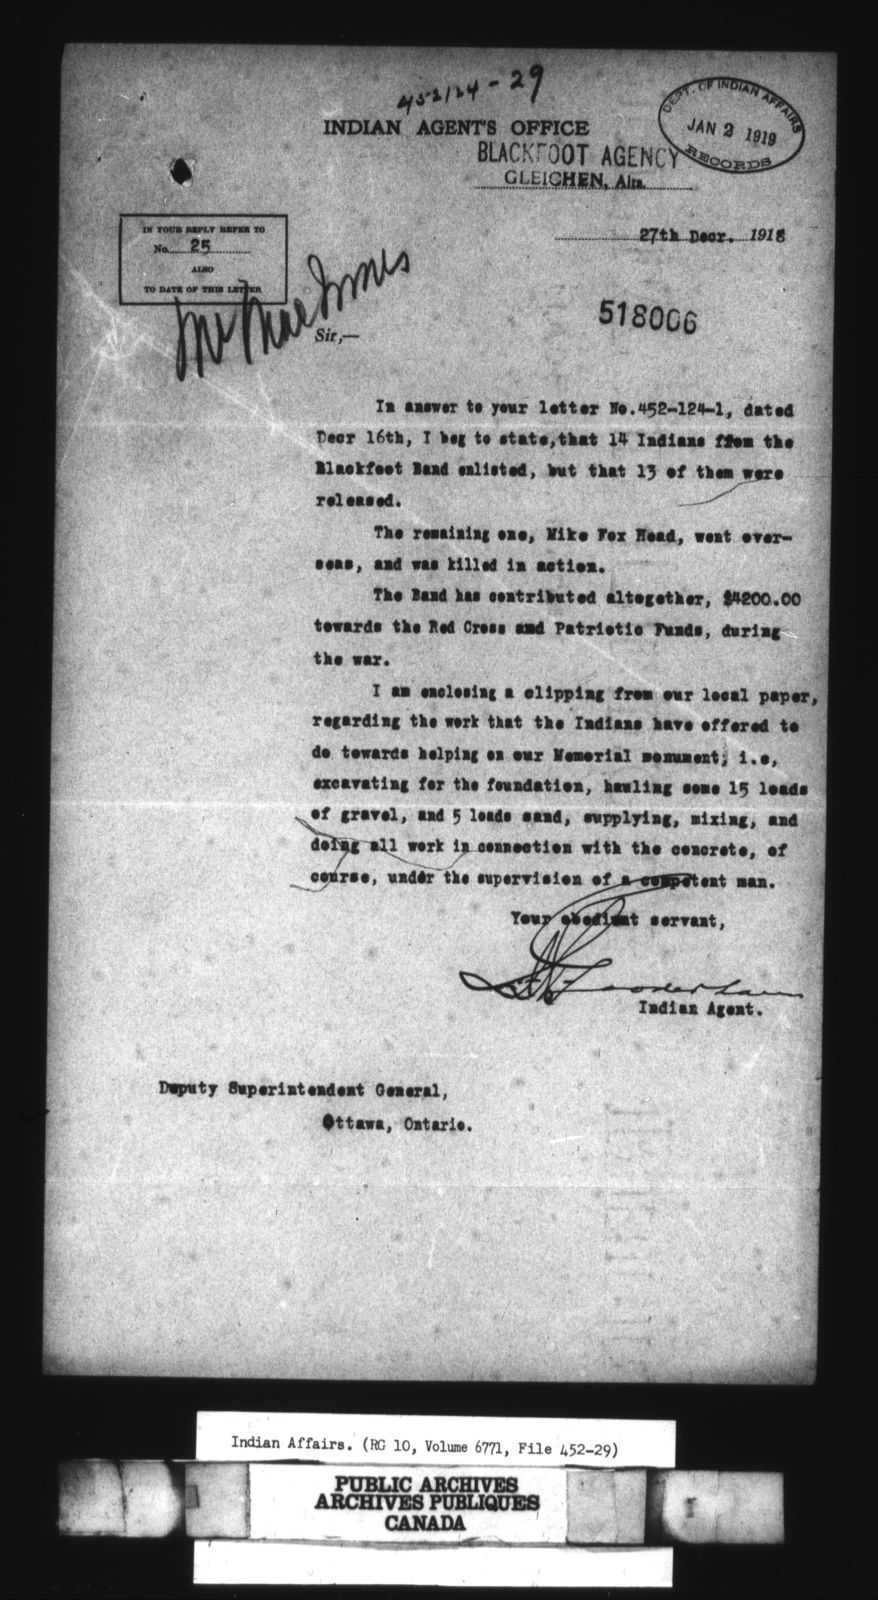 A typed letter from an Indian Agent to Ottawa detailing local indigenous contributions to the First World War and memorial efforts.